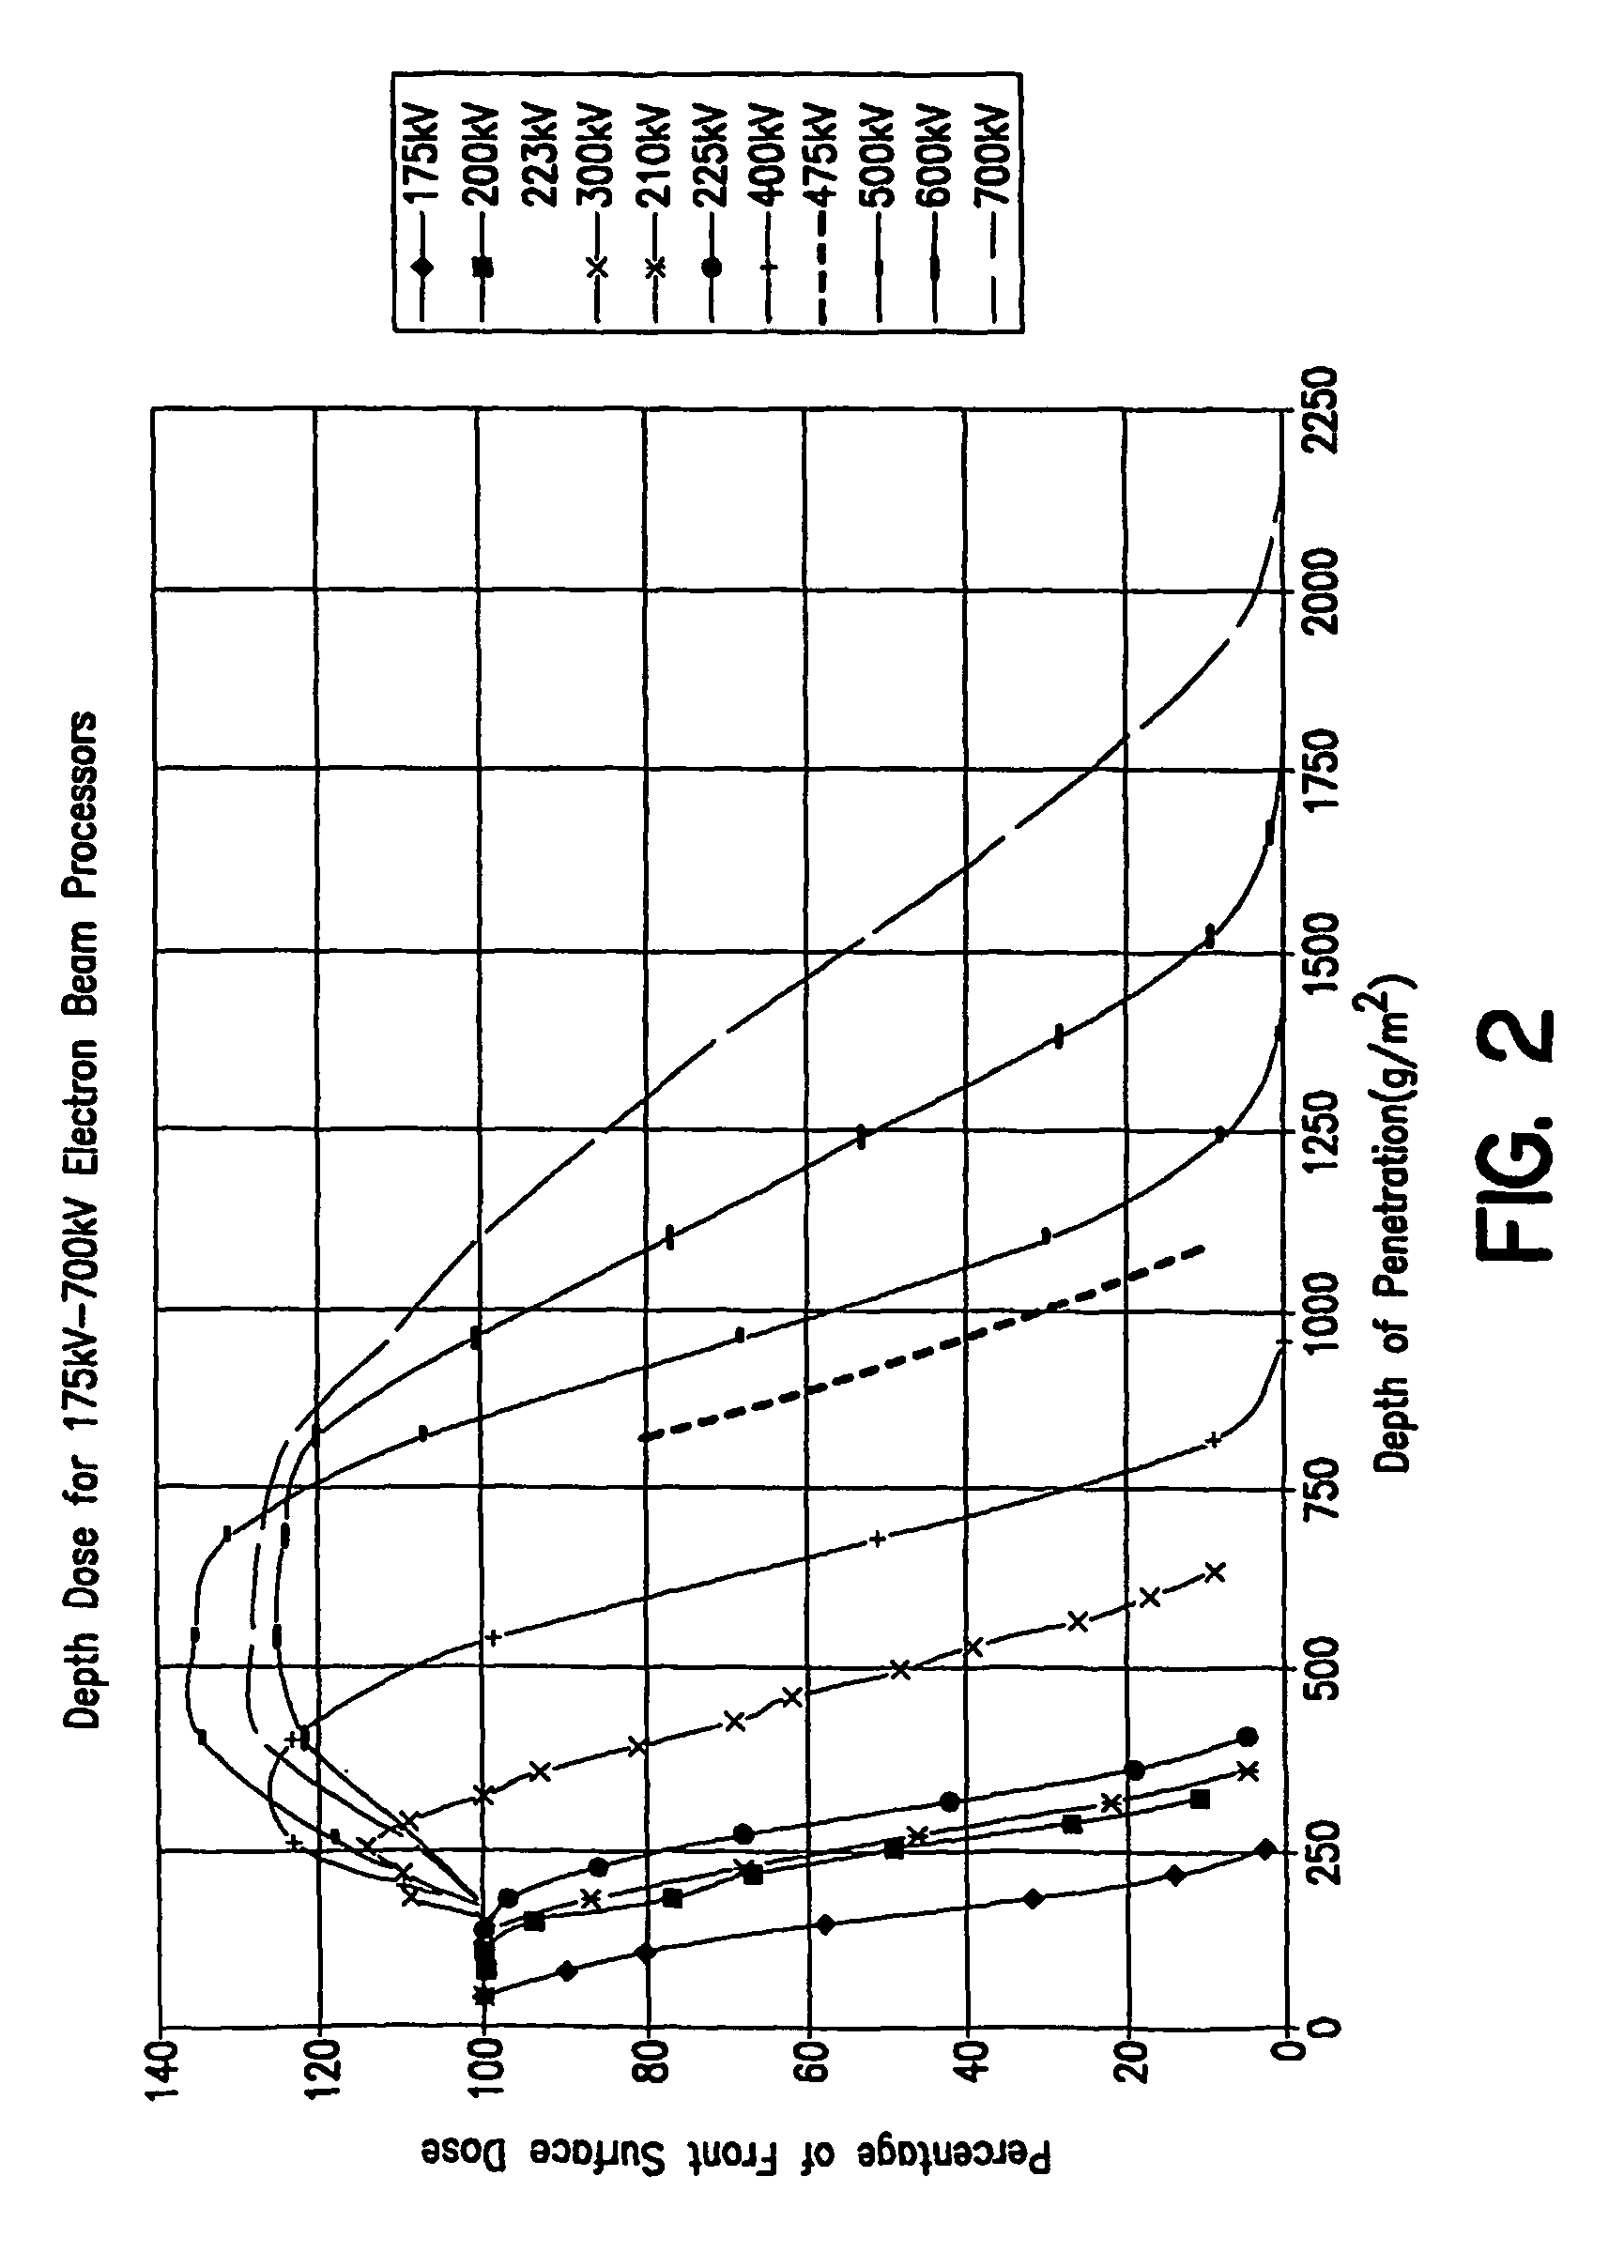 Process for electron sterilization of a container